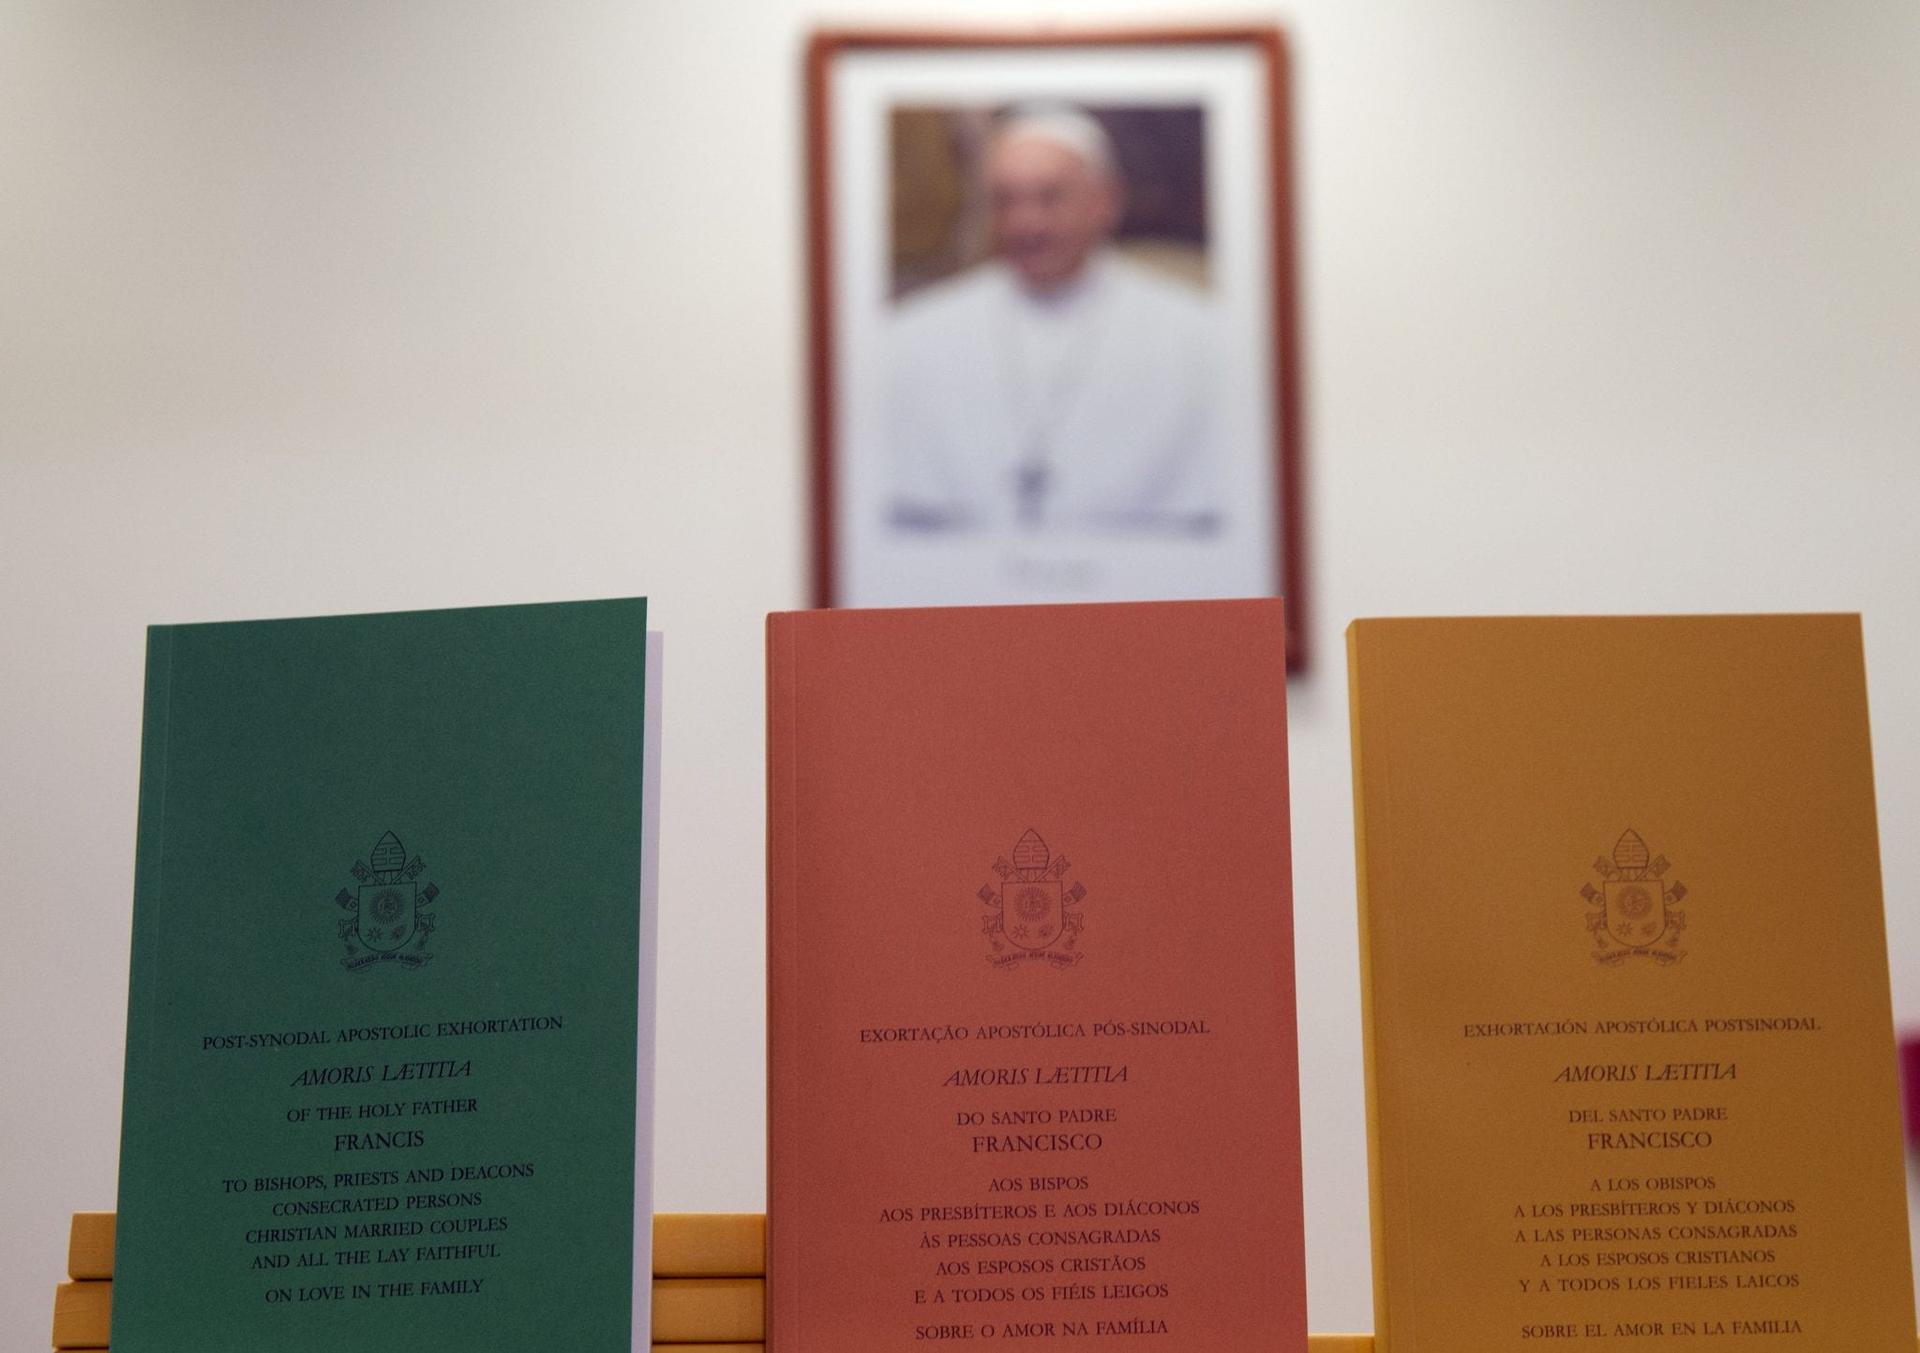 Two views on Pope Francis' 'Magna Carta for the family'